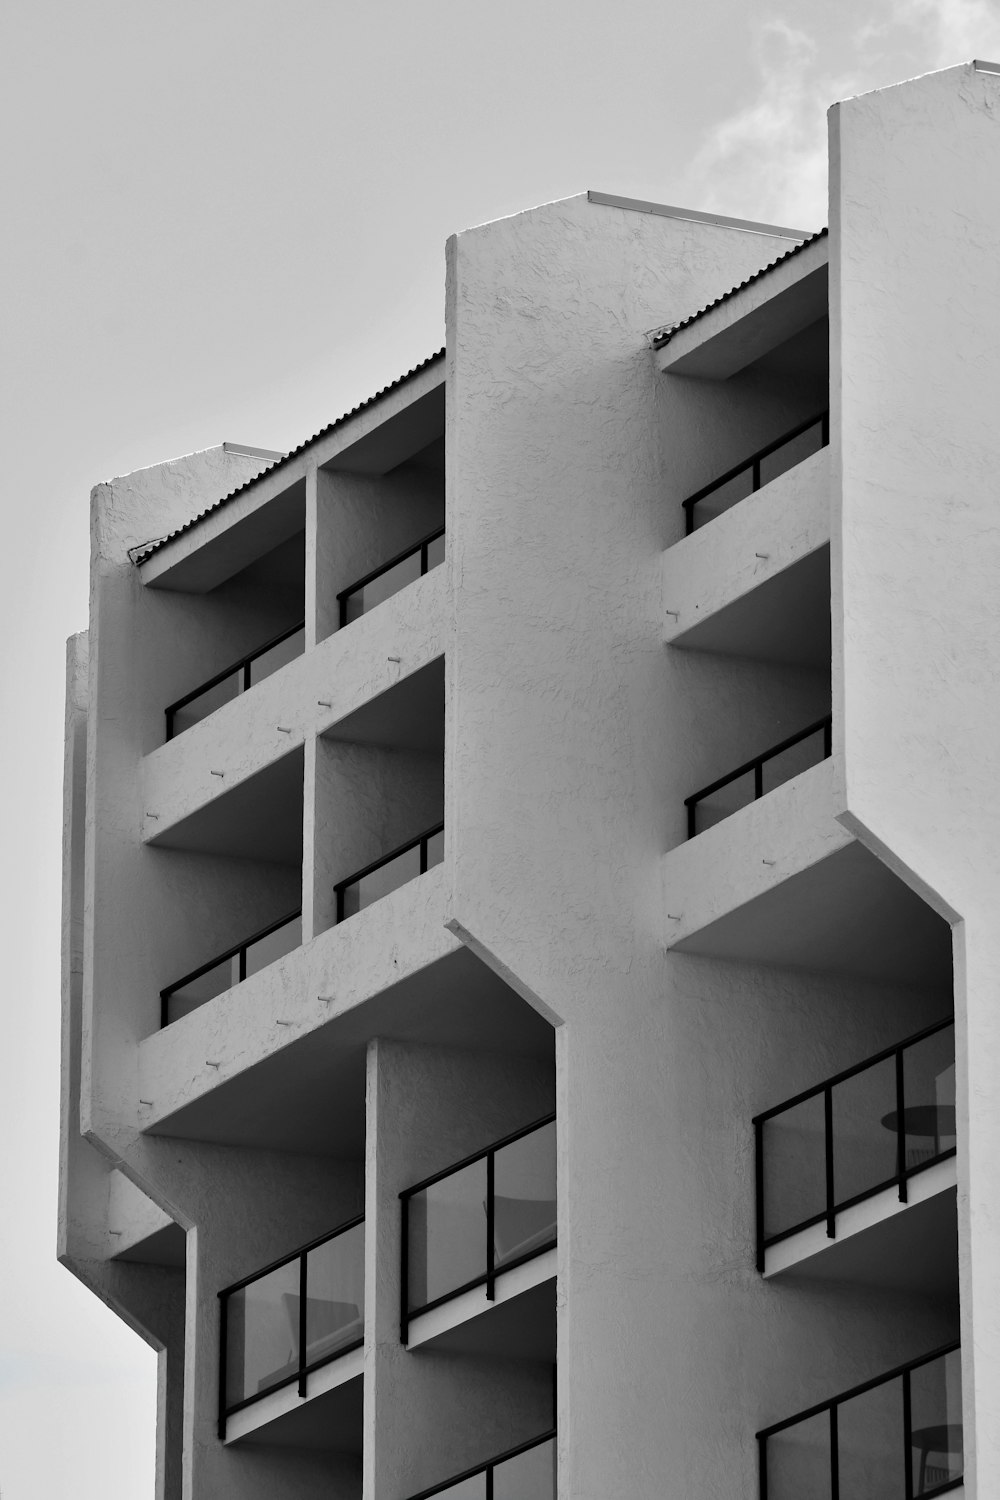 a building with balconies